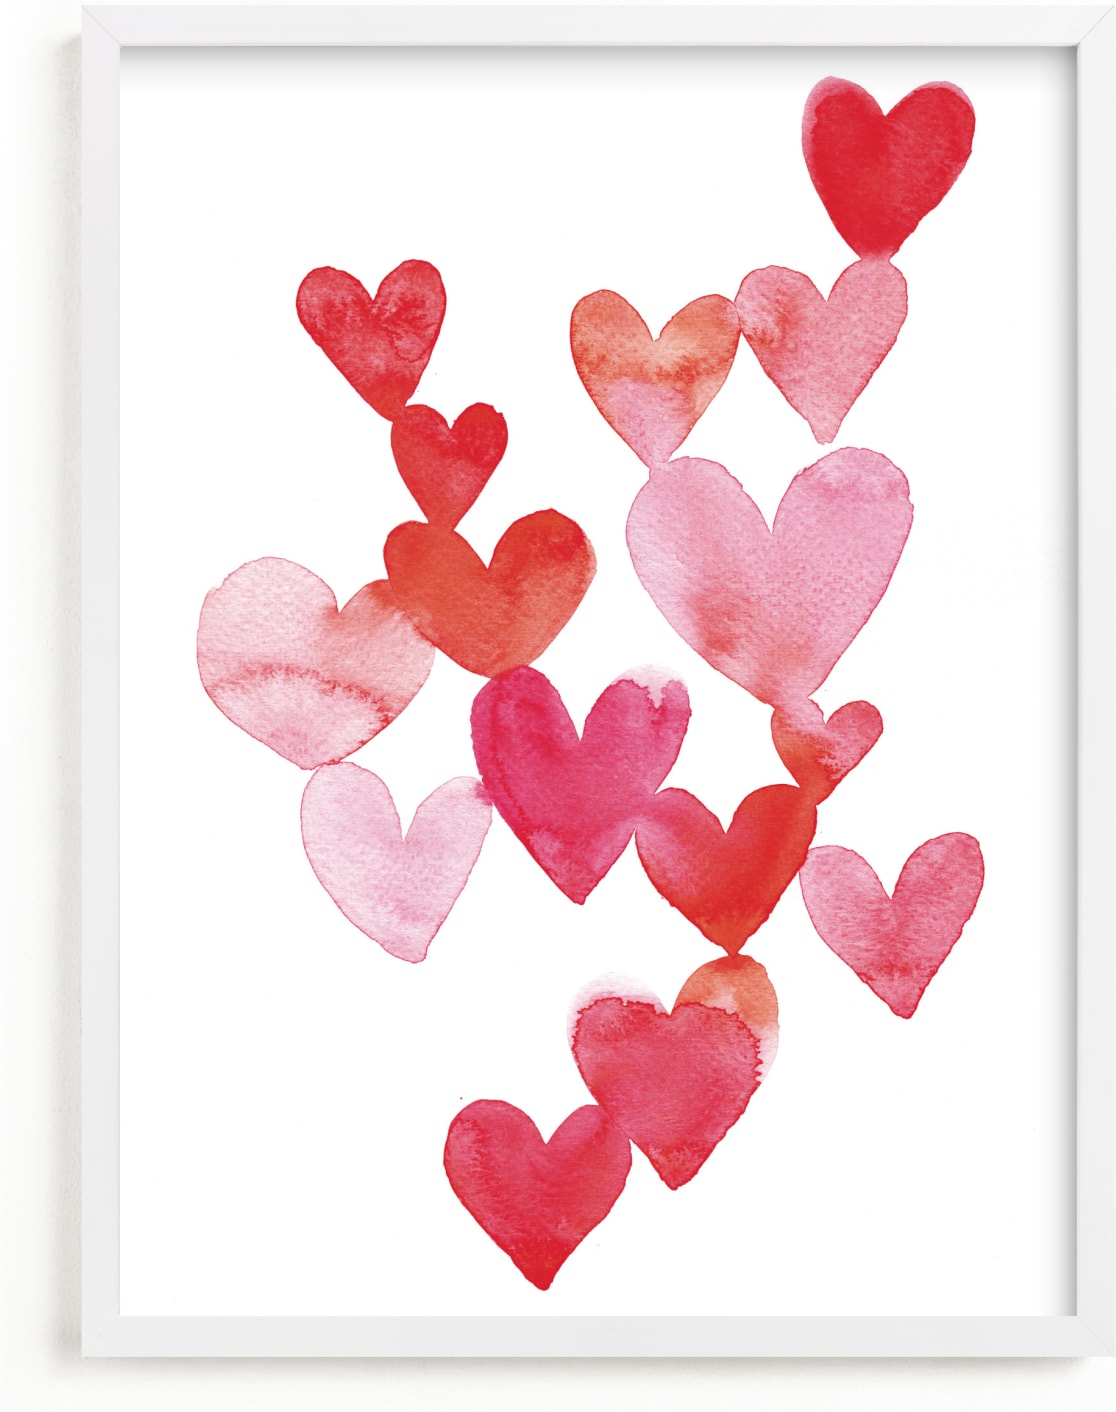 This is a pink kids wall art by Claudia Orengo called Love is around you .